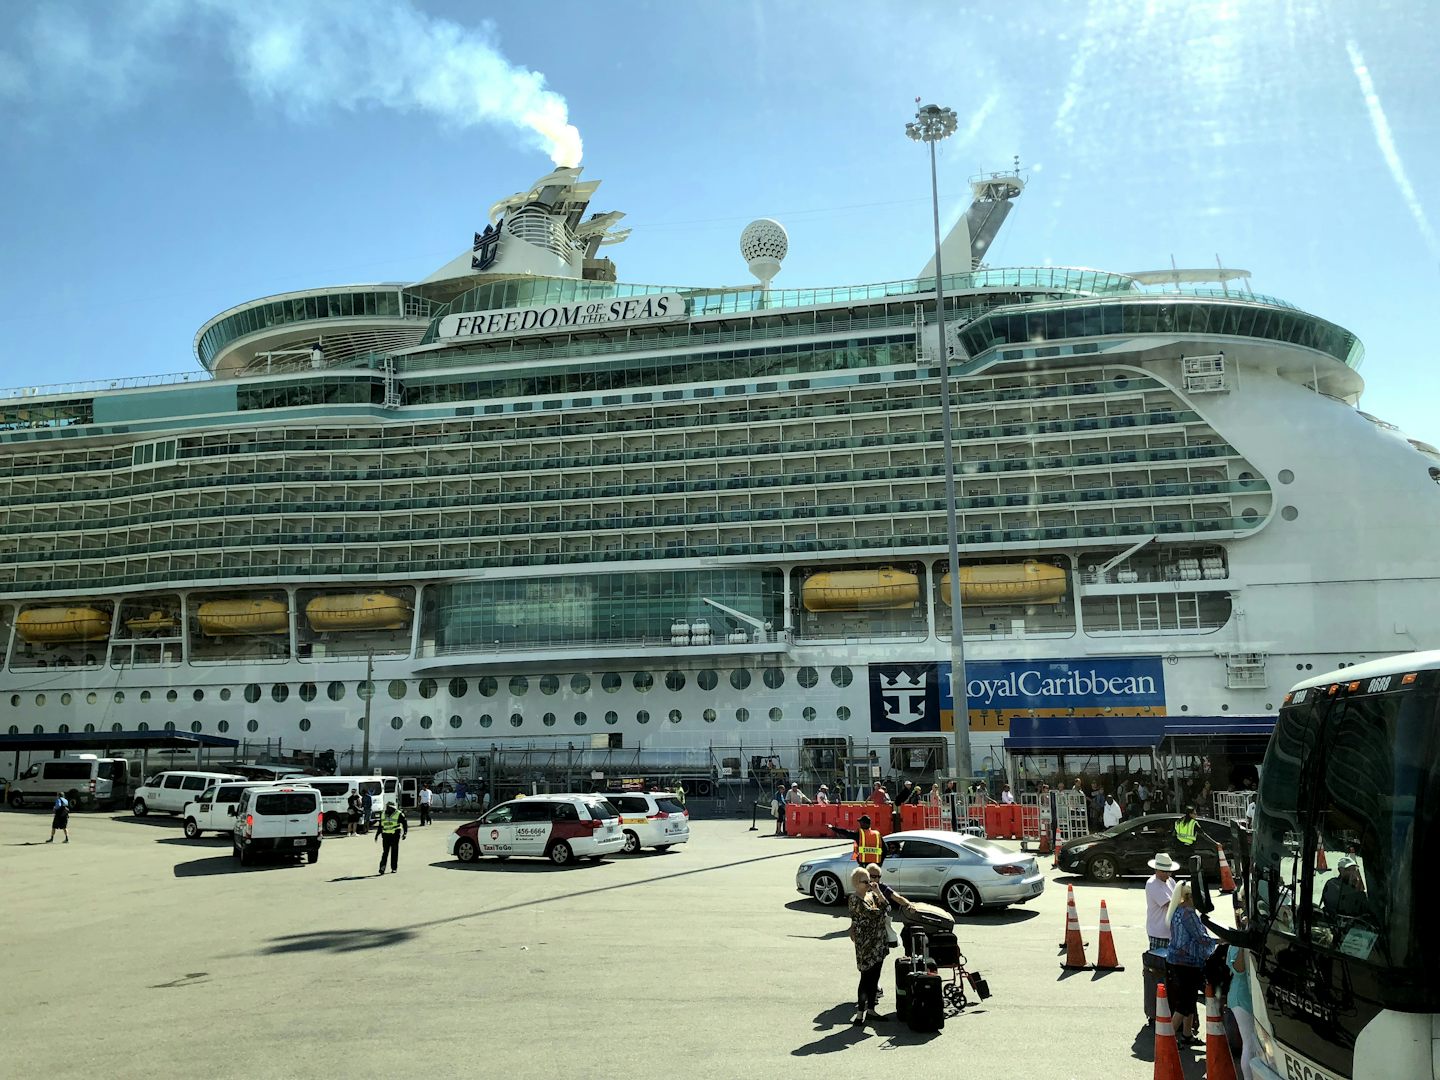 The cruise ship from land.